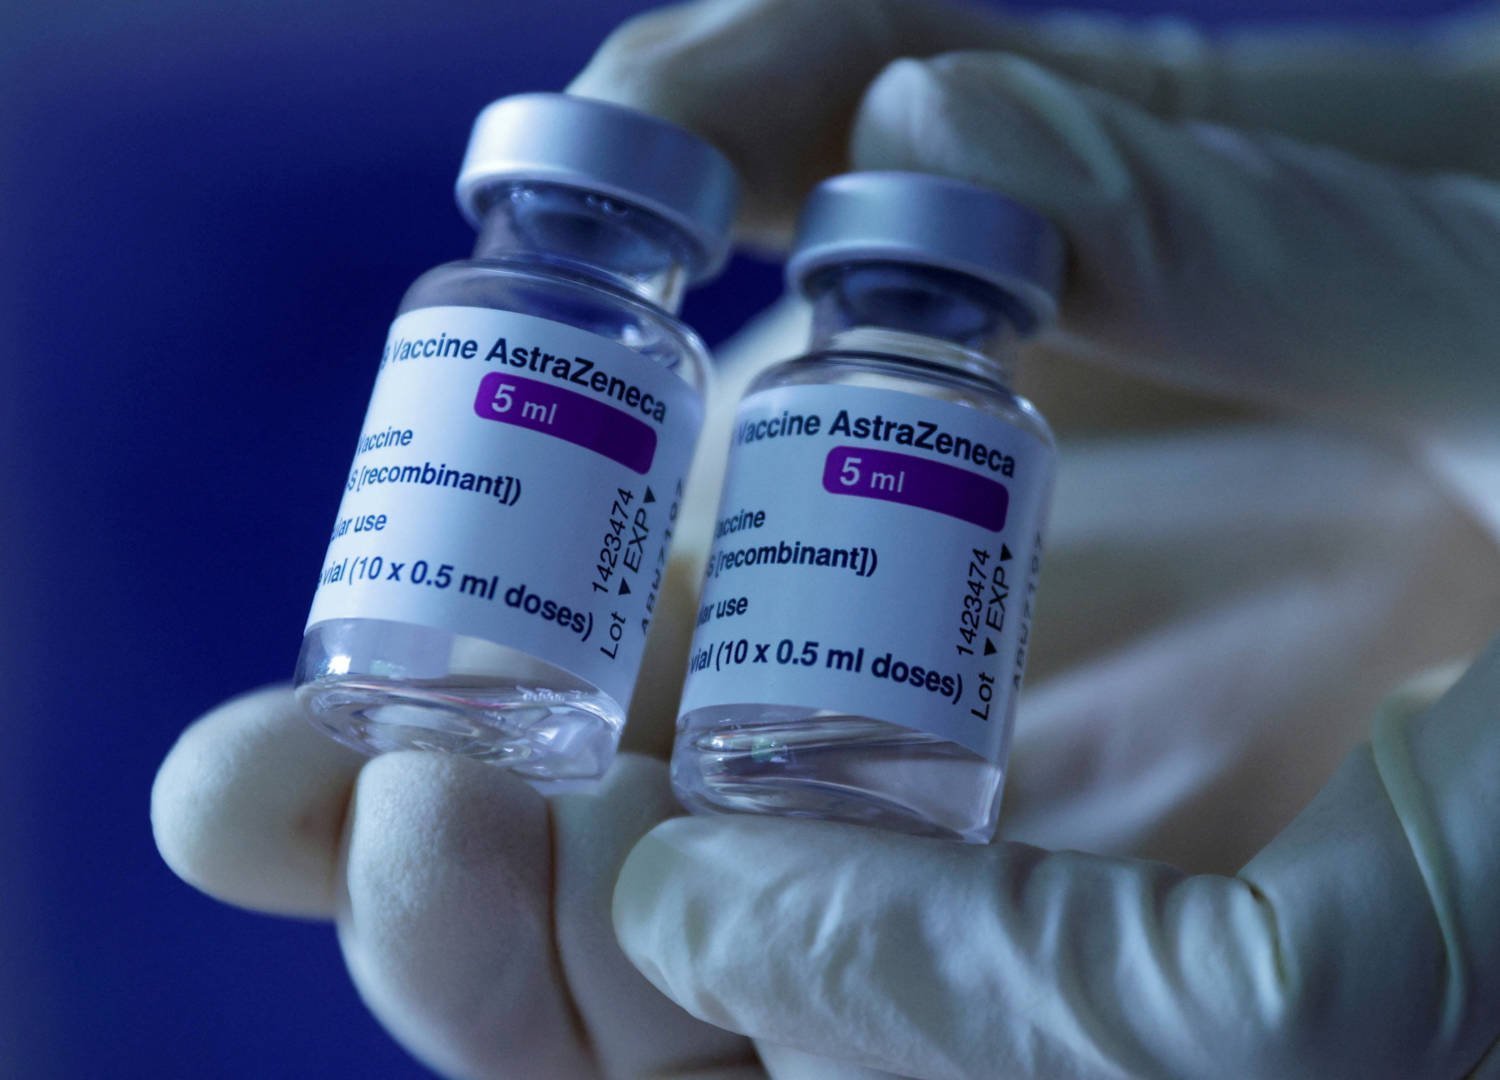 File Photo: A Doctor Shows Vials Of Astrazeneca's Covid 19 Vaccine In His General Practice Facility, As The Spread Of The Coronavirus Disease (covid 19) Continues, In Vienna, Austria